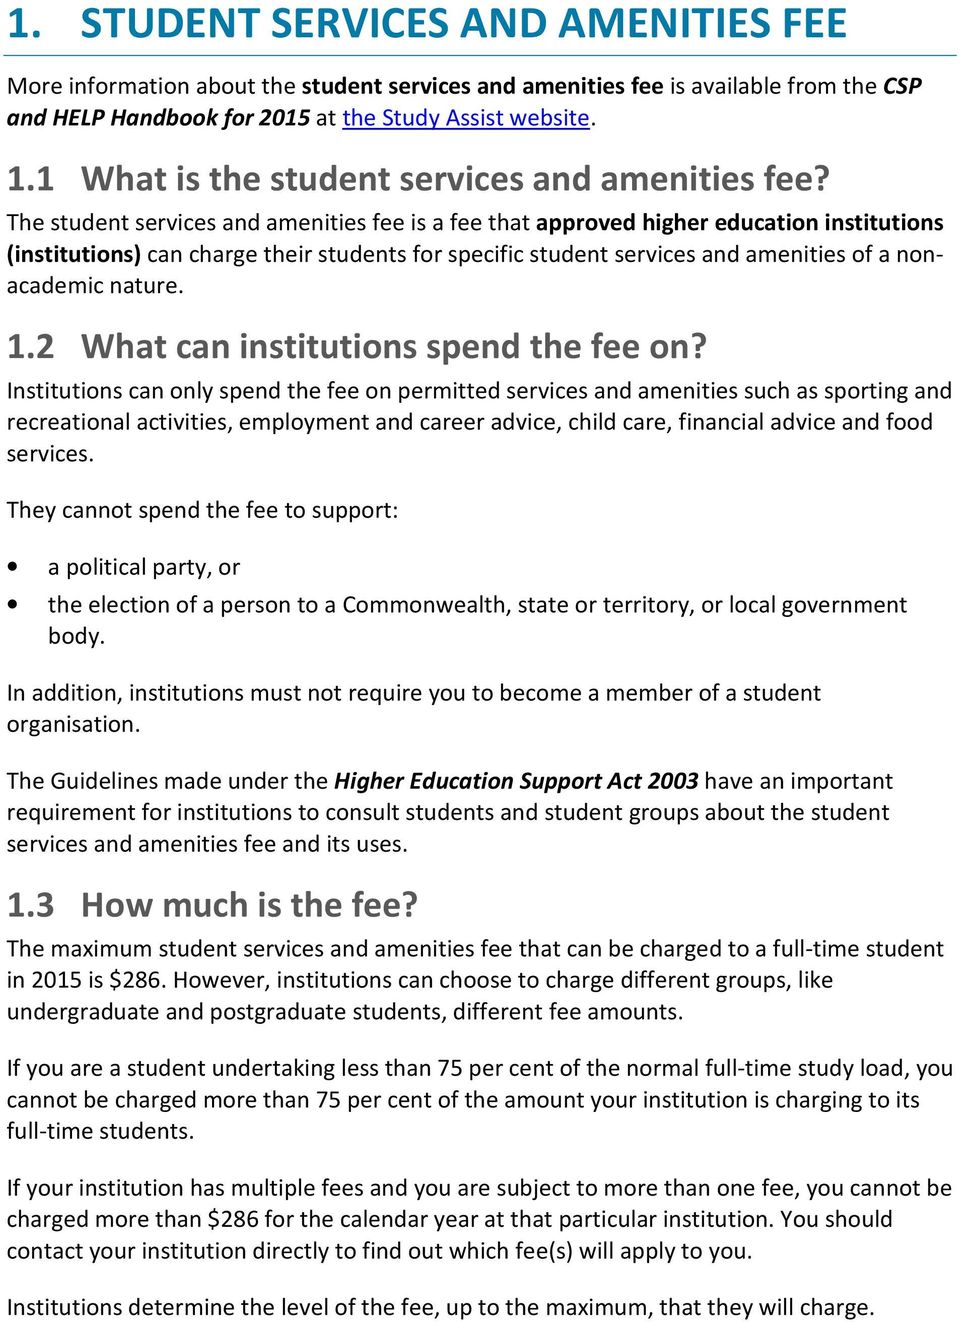 The student services and amenities fee is a fee that approved higher education institutions (institutions) can charge their students for specific student services and amenities of a nonacademic